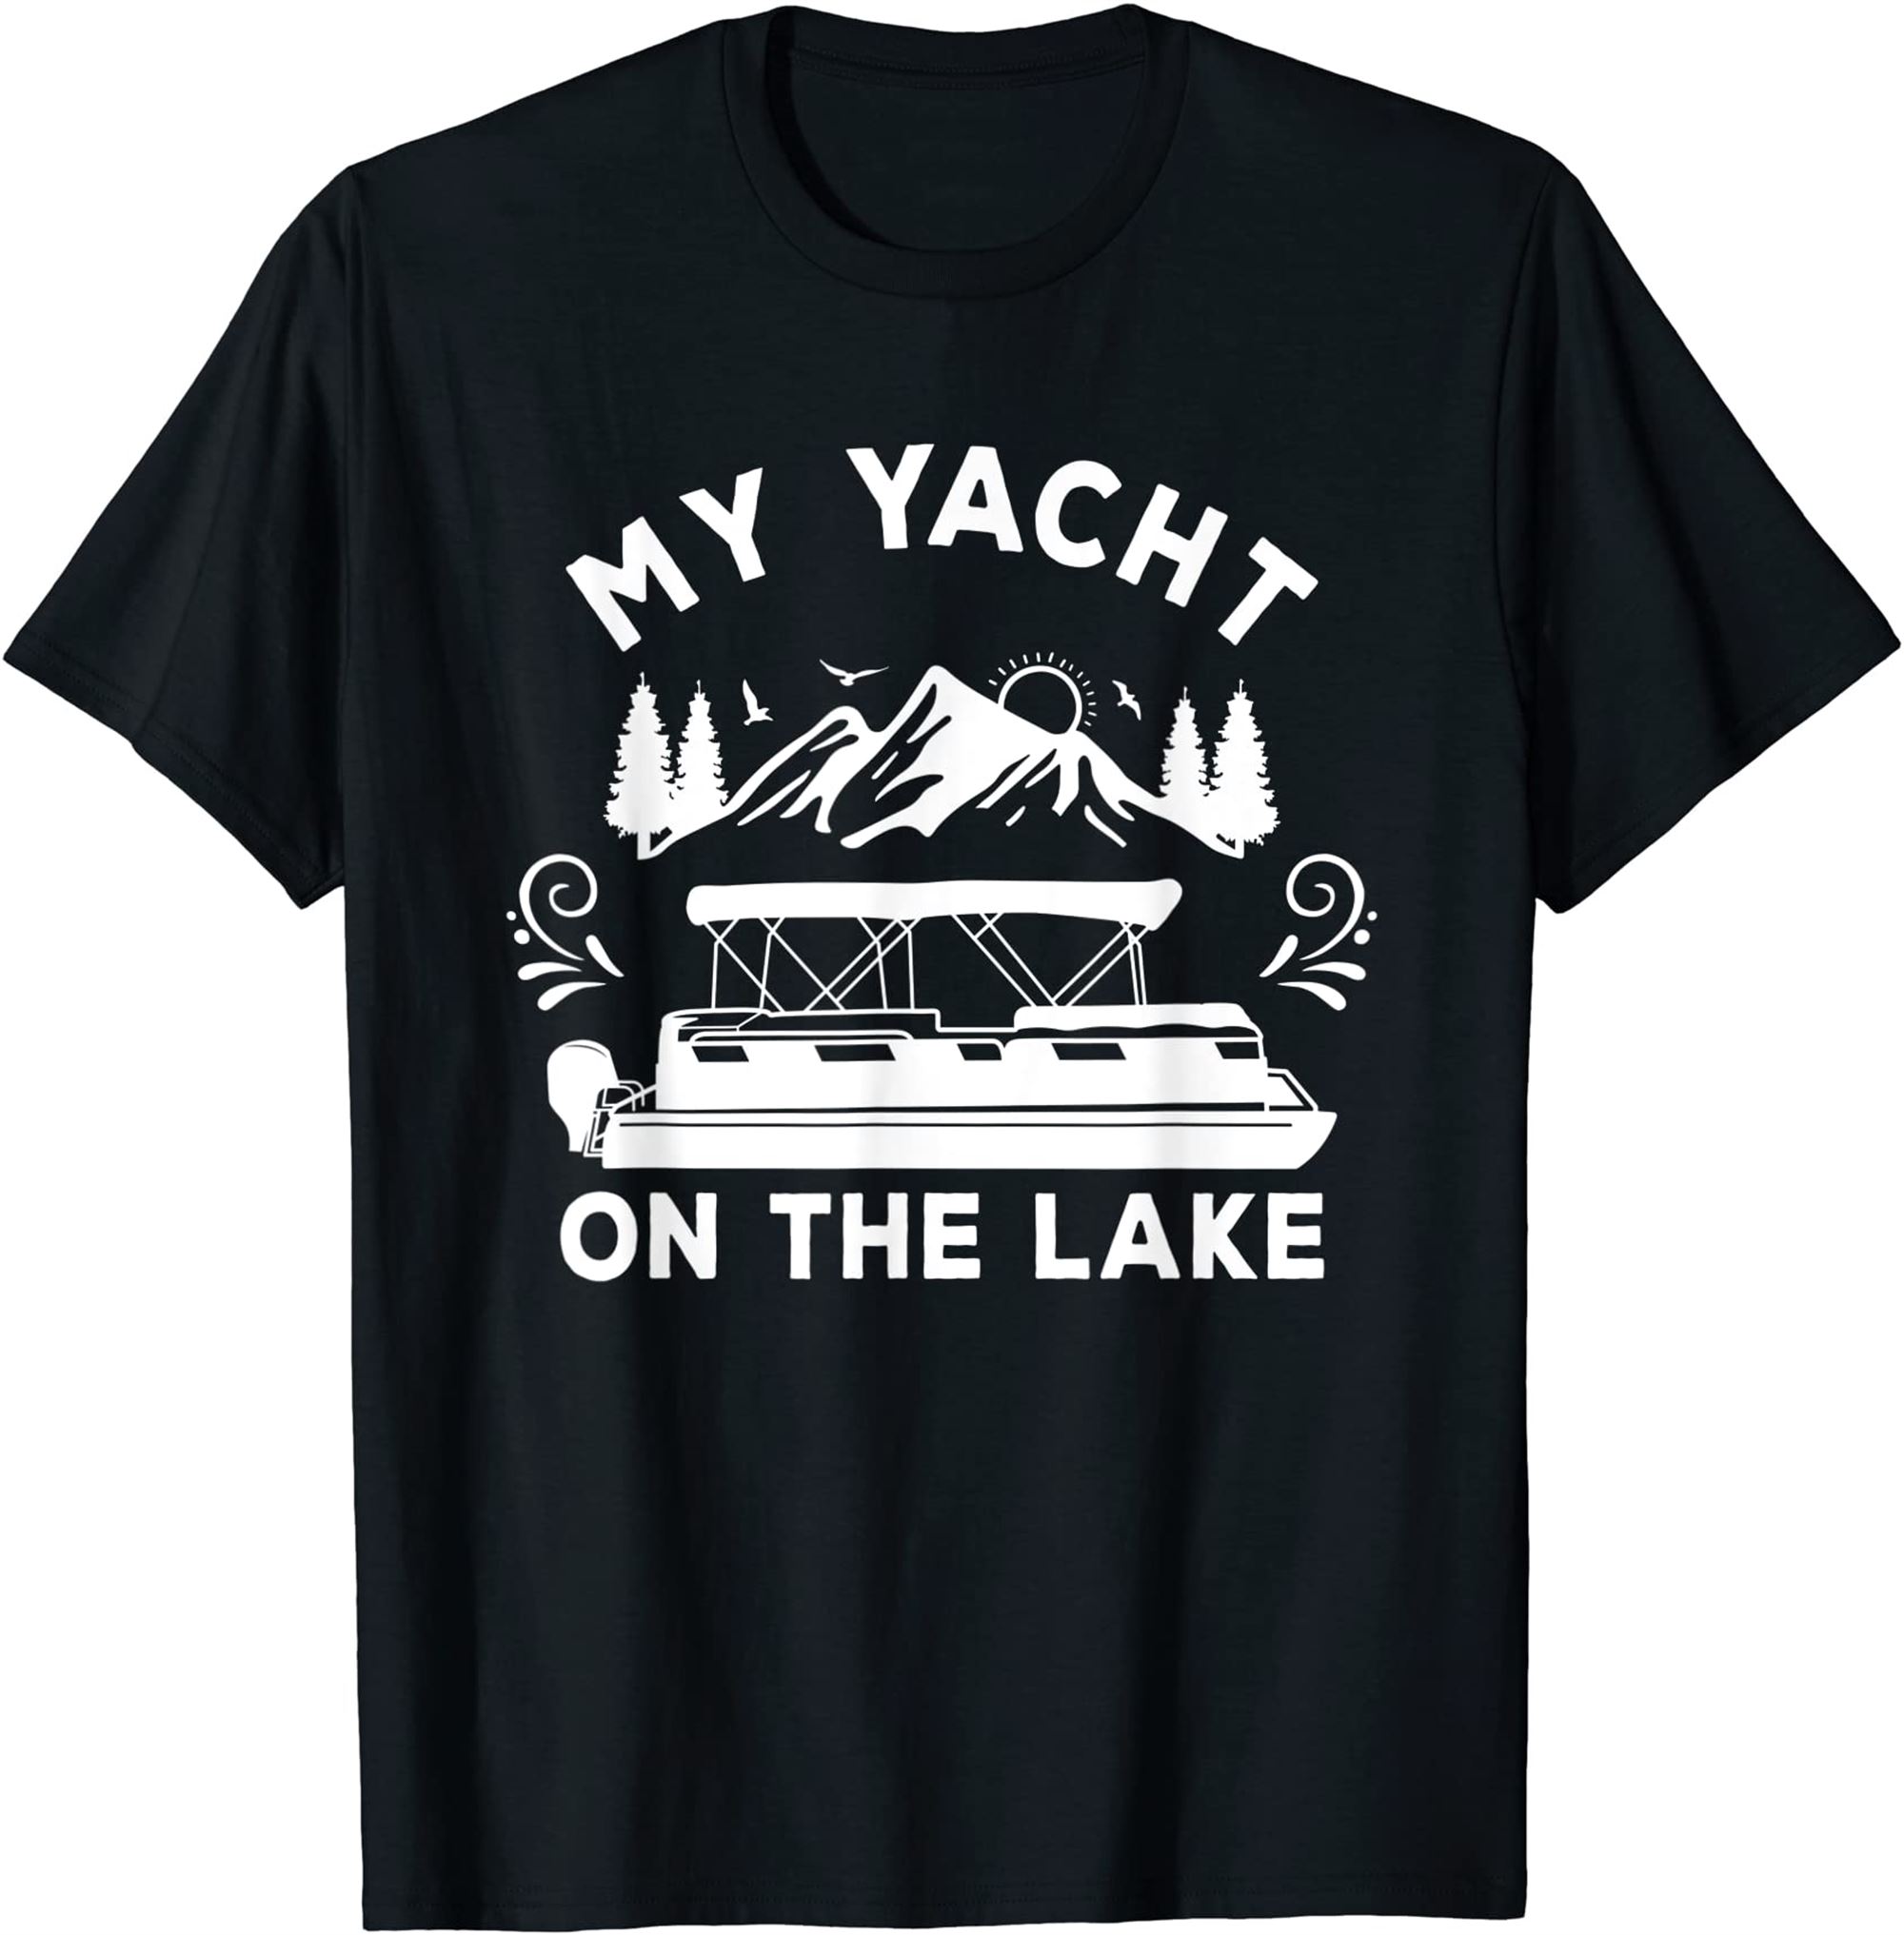 My Yacht On The Lake Pontoon Boat T-shirt Full Size Up To 5xl